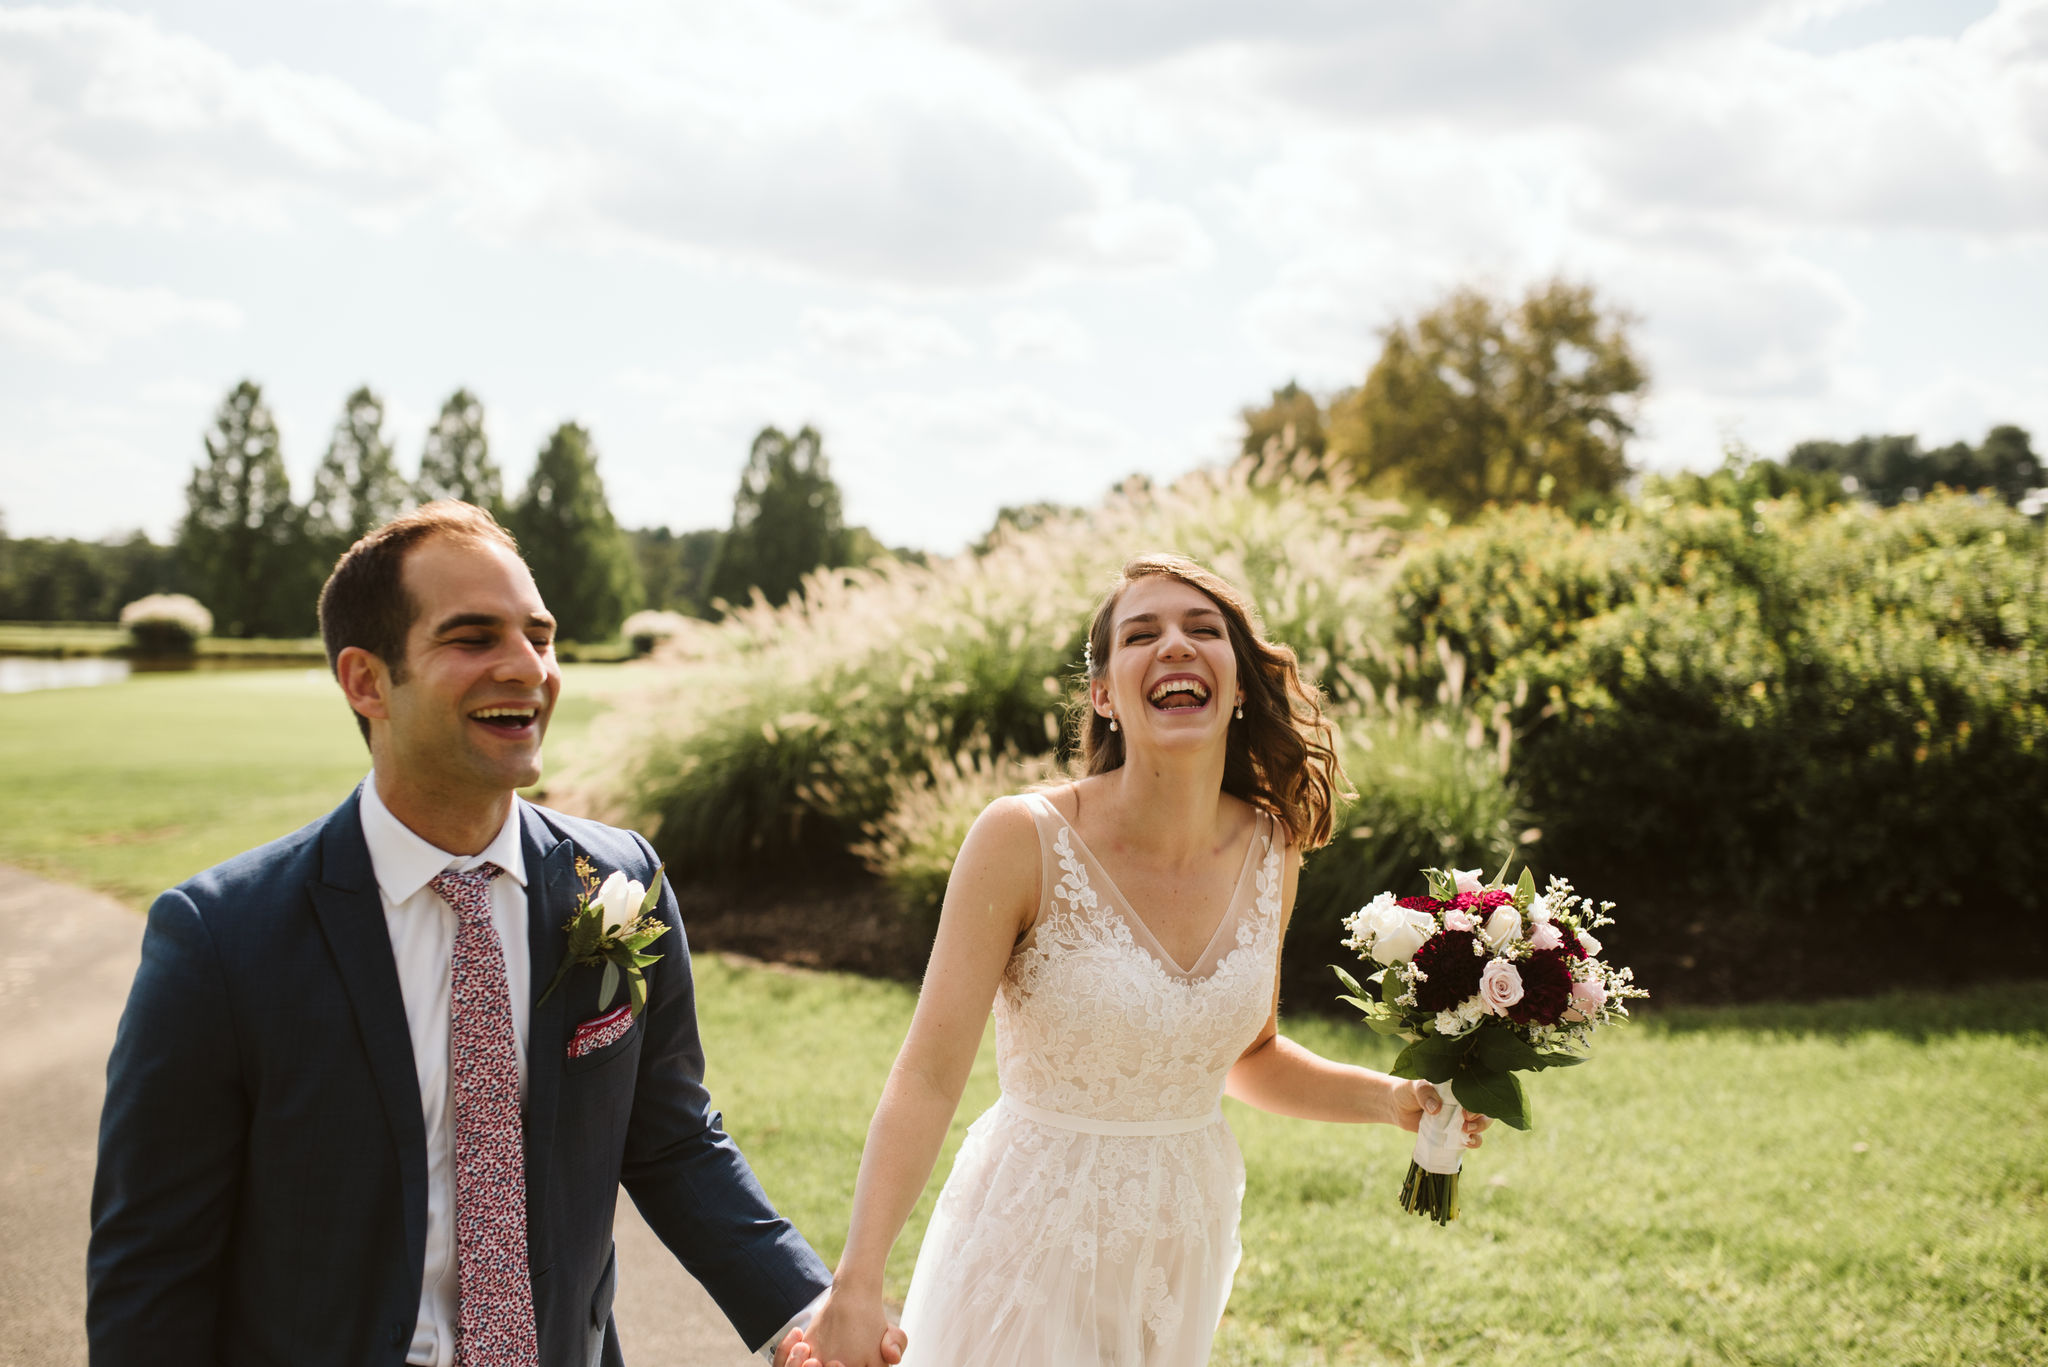  Phoenix Maryland, Baltimore Wedding Photographer, Eagle’s Nest Country Club, Classic, Romantic, Bride and Groom Laughing Together Outdoors, BHLDN Dress, Dundalk Florist, Gaby Vinas 